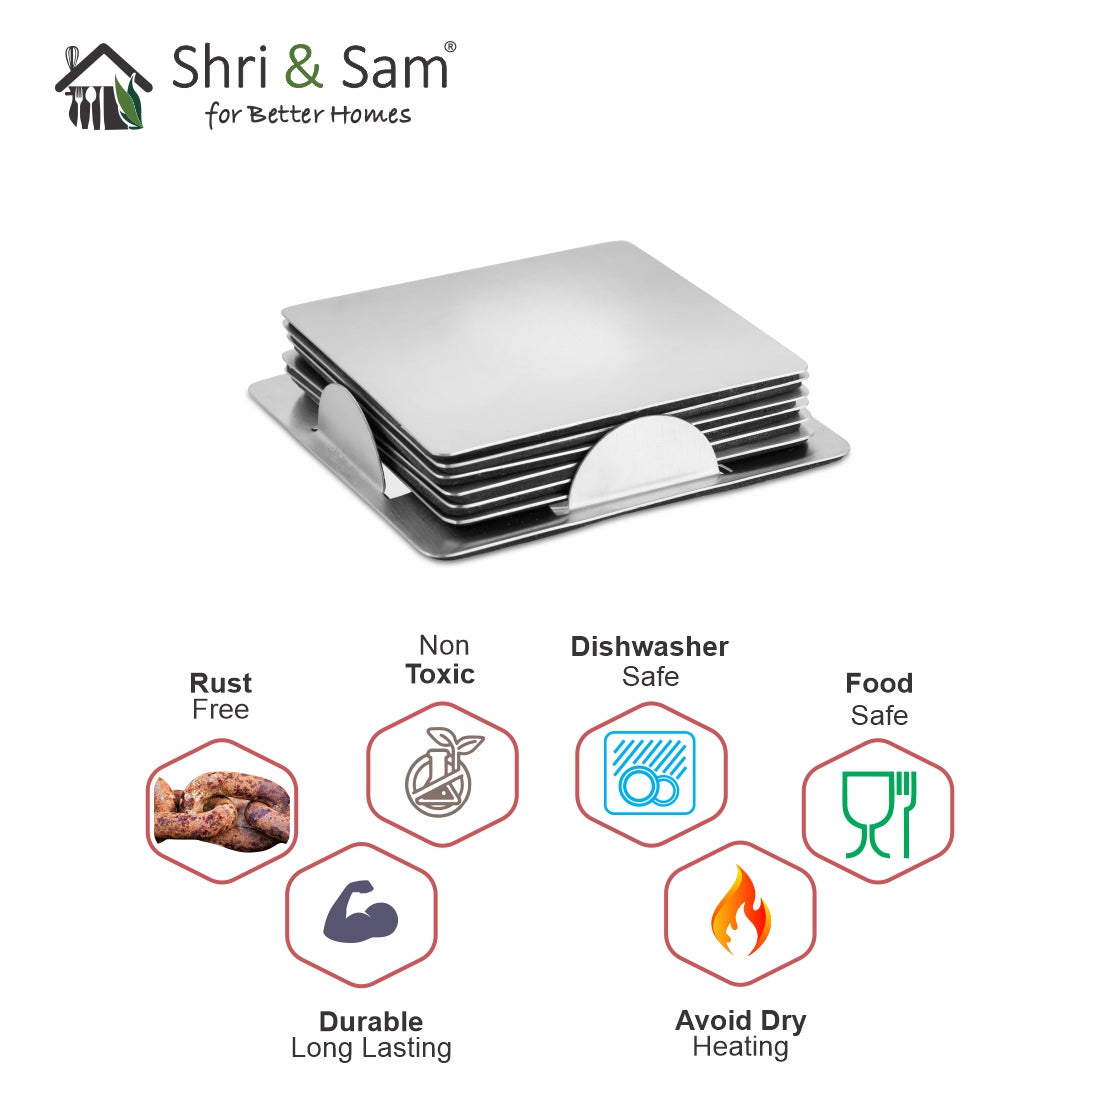 Stainless Steel Square Coaster Set